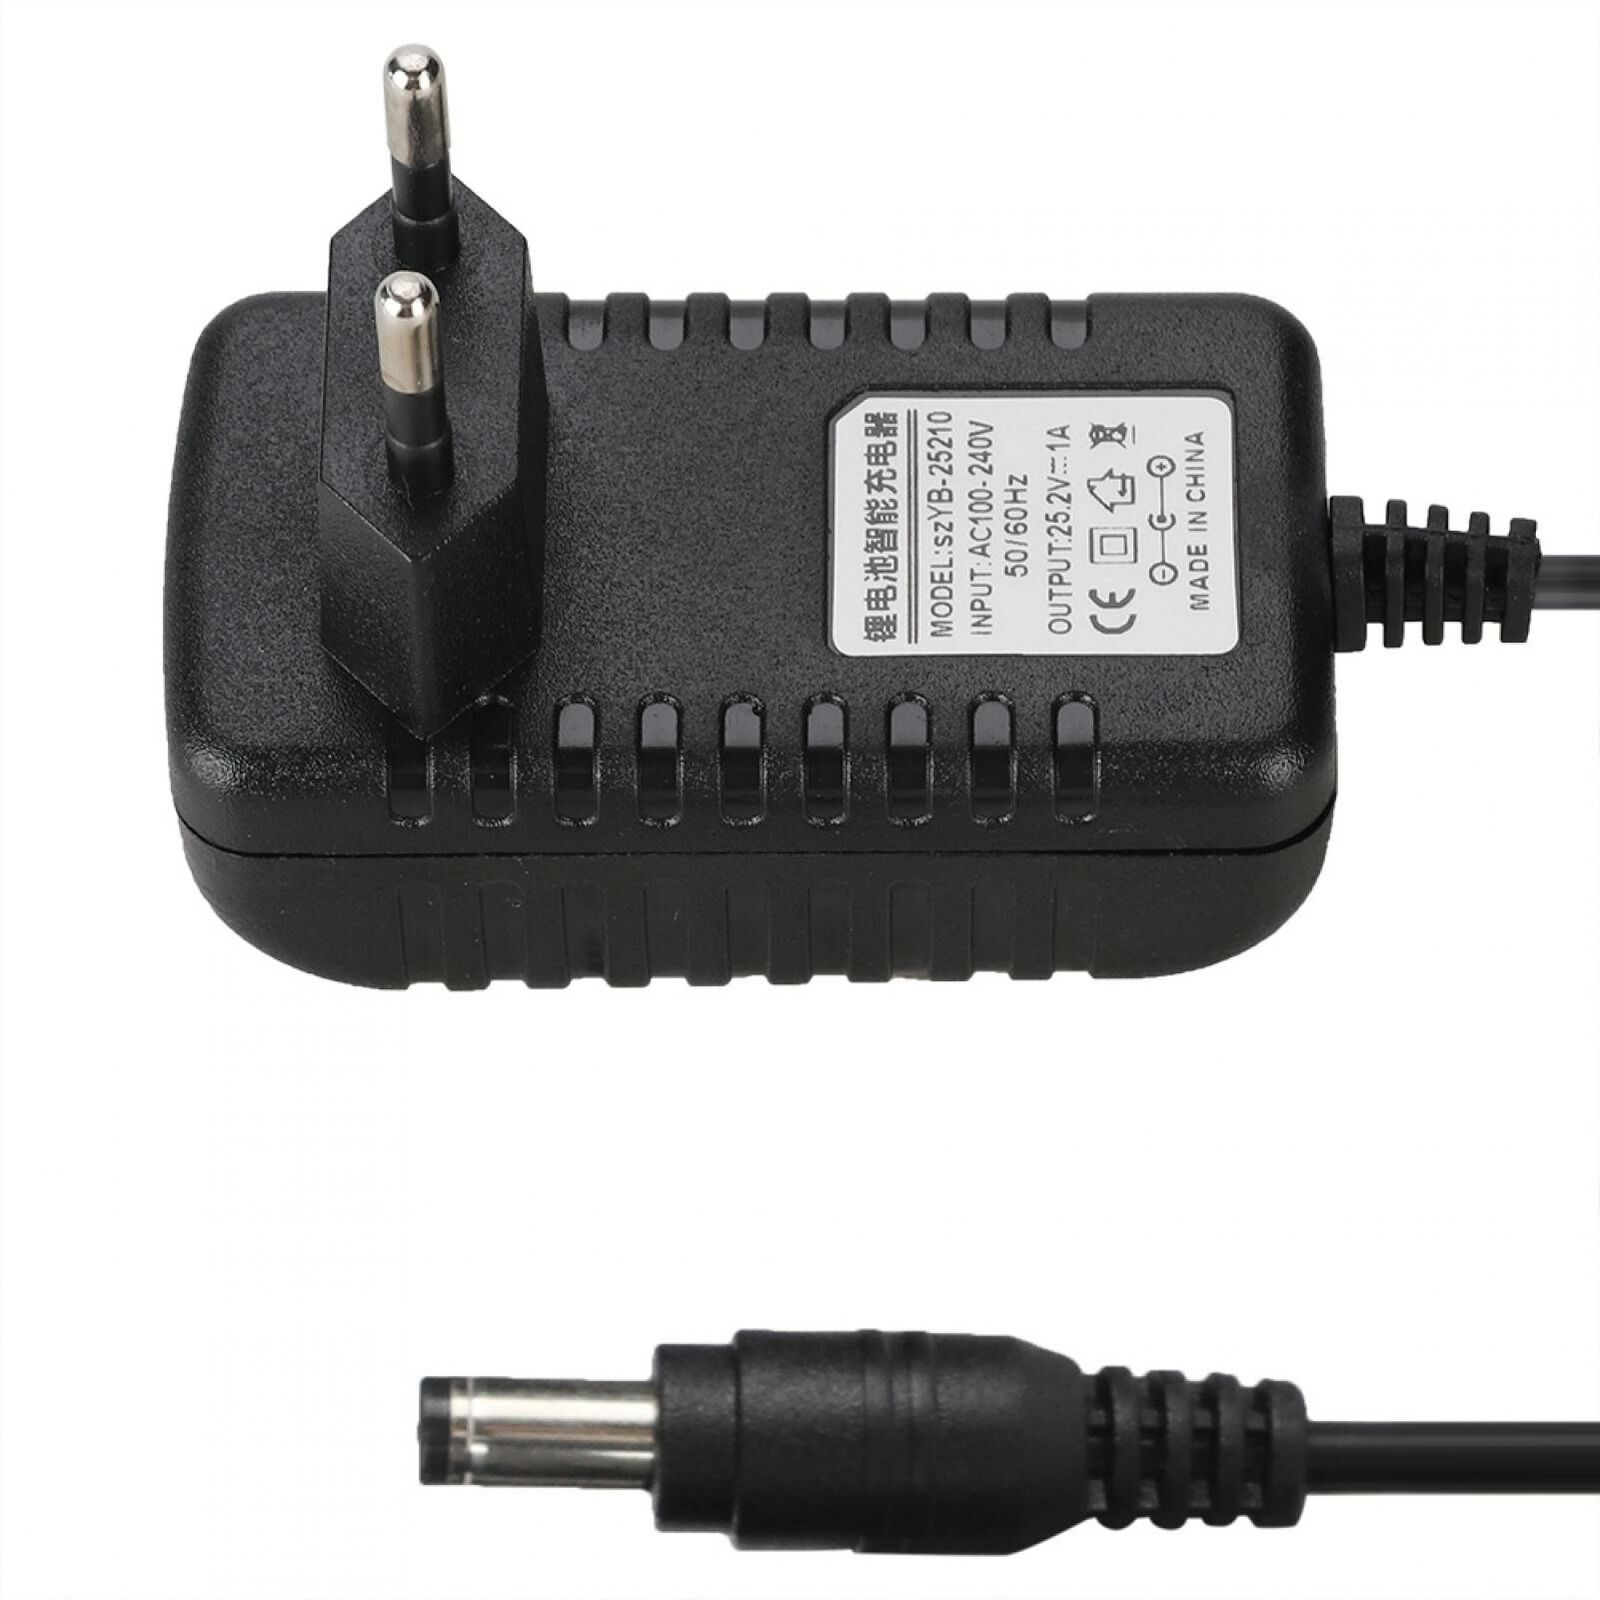 Battery Charger Charger Adapter 25.2V/1A For Balancing Cars Toys For Charging Features: 25.2V/1A he